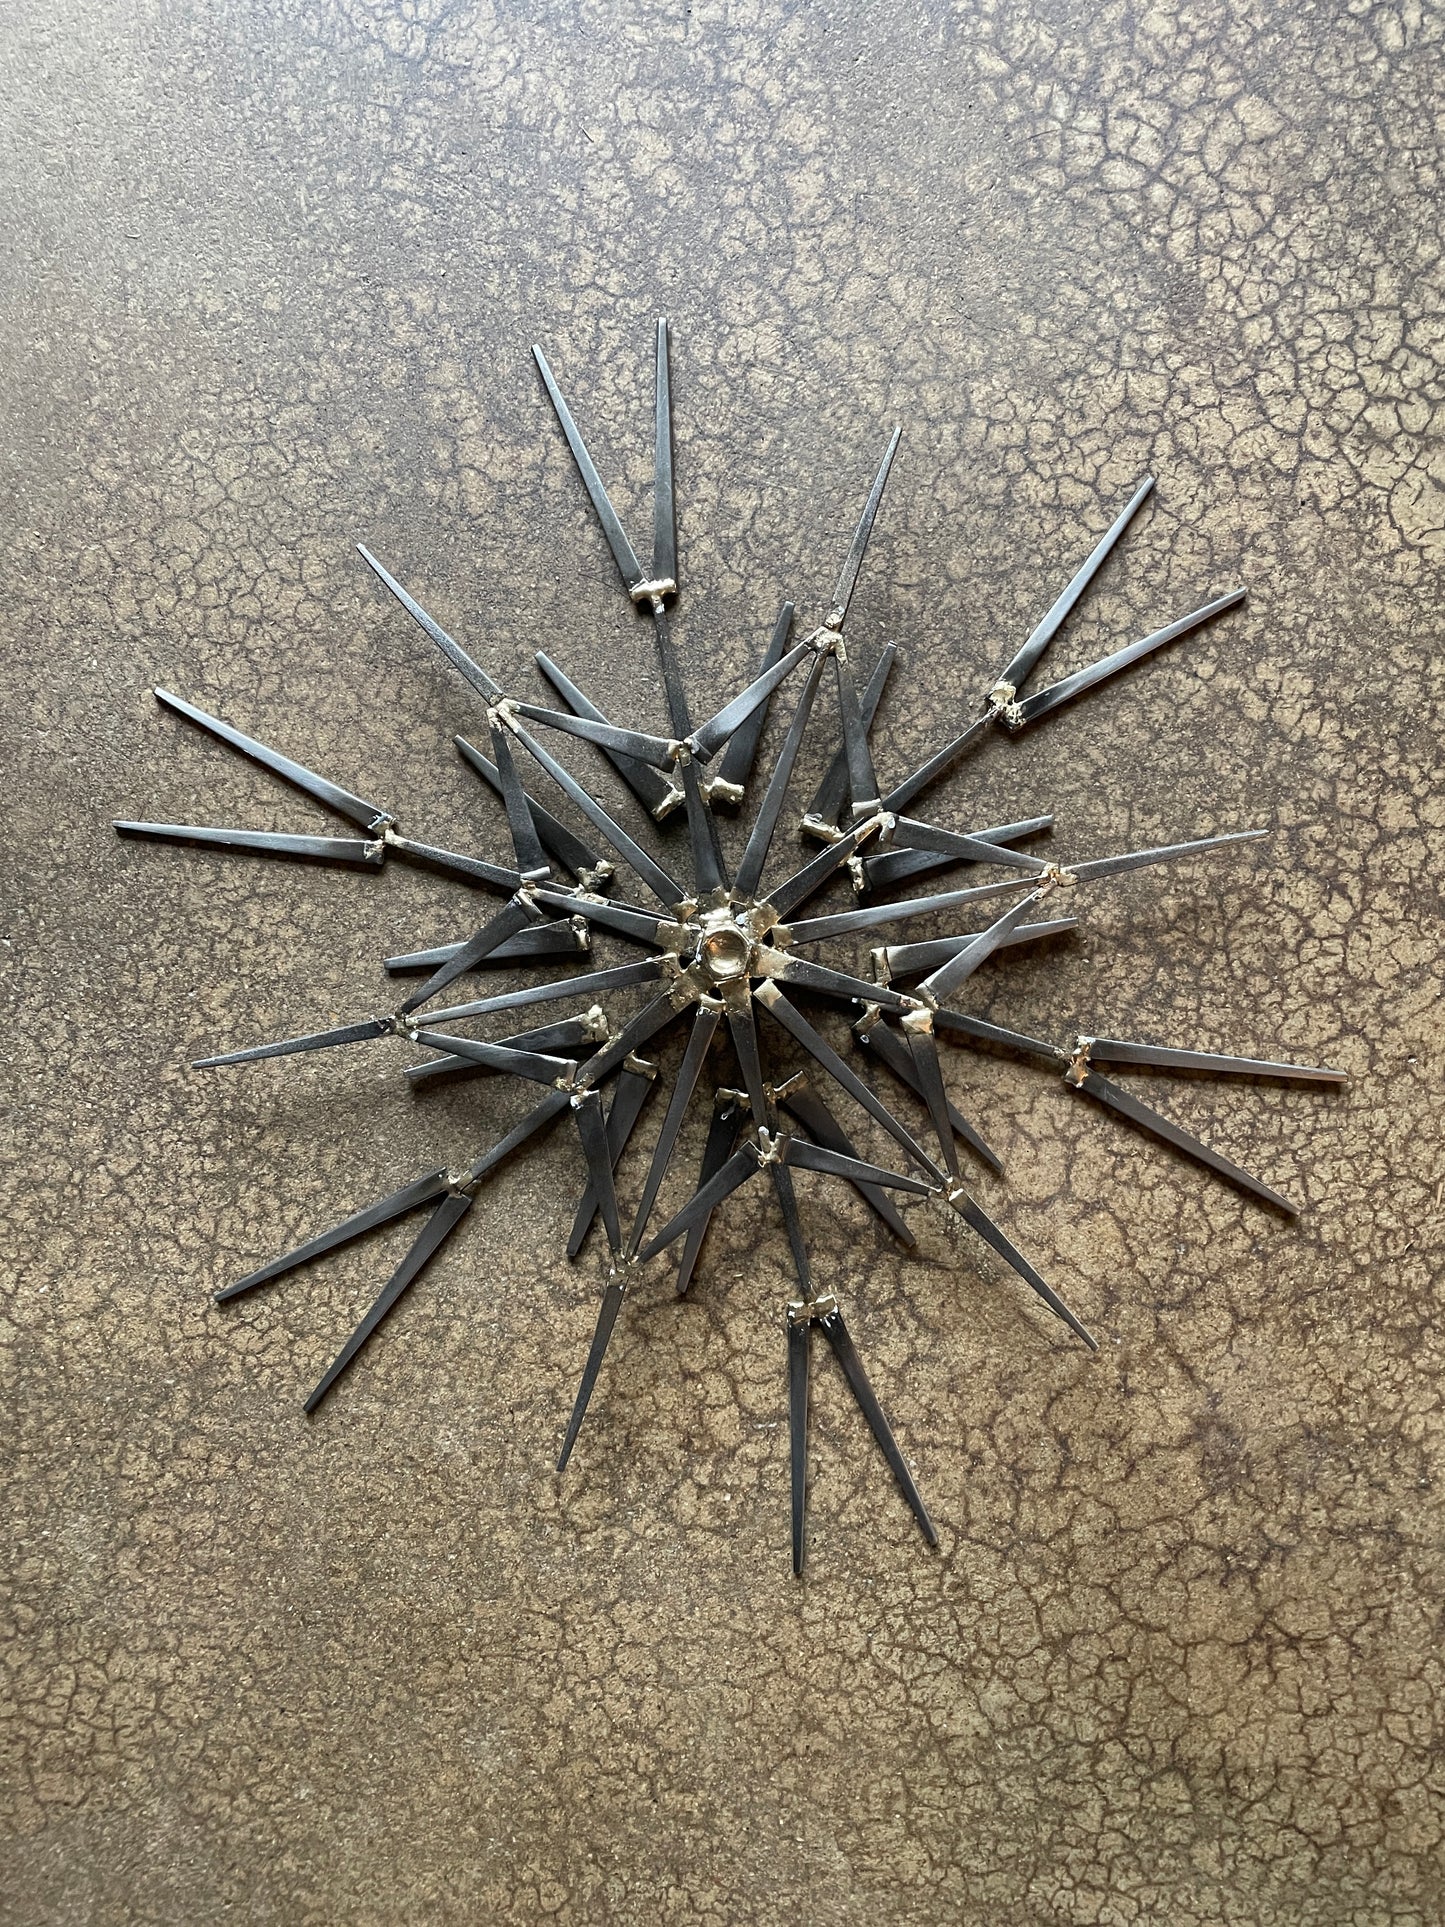 Clyde-o-scope - Brutalist Mid-Century style Metal Wall Sculpture